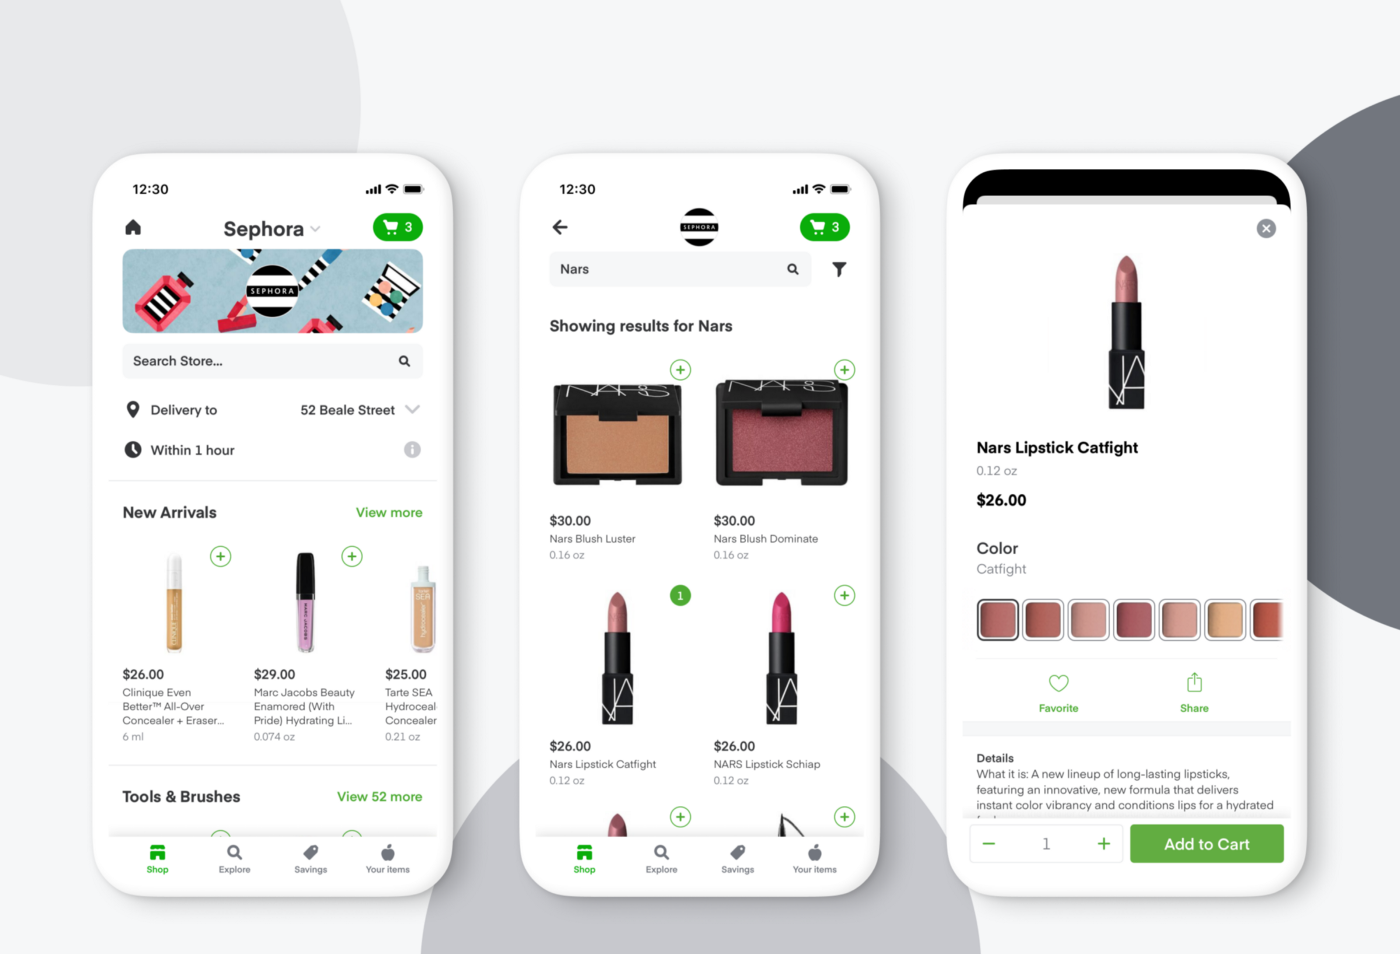 Instacart Now Offers Same-Day Delivery of Beauty Products From Sephora